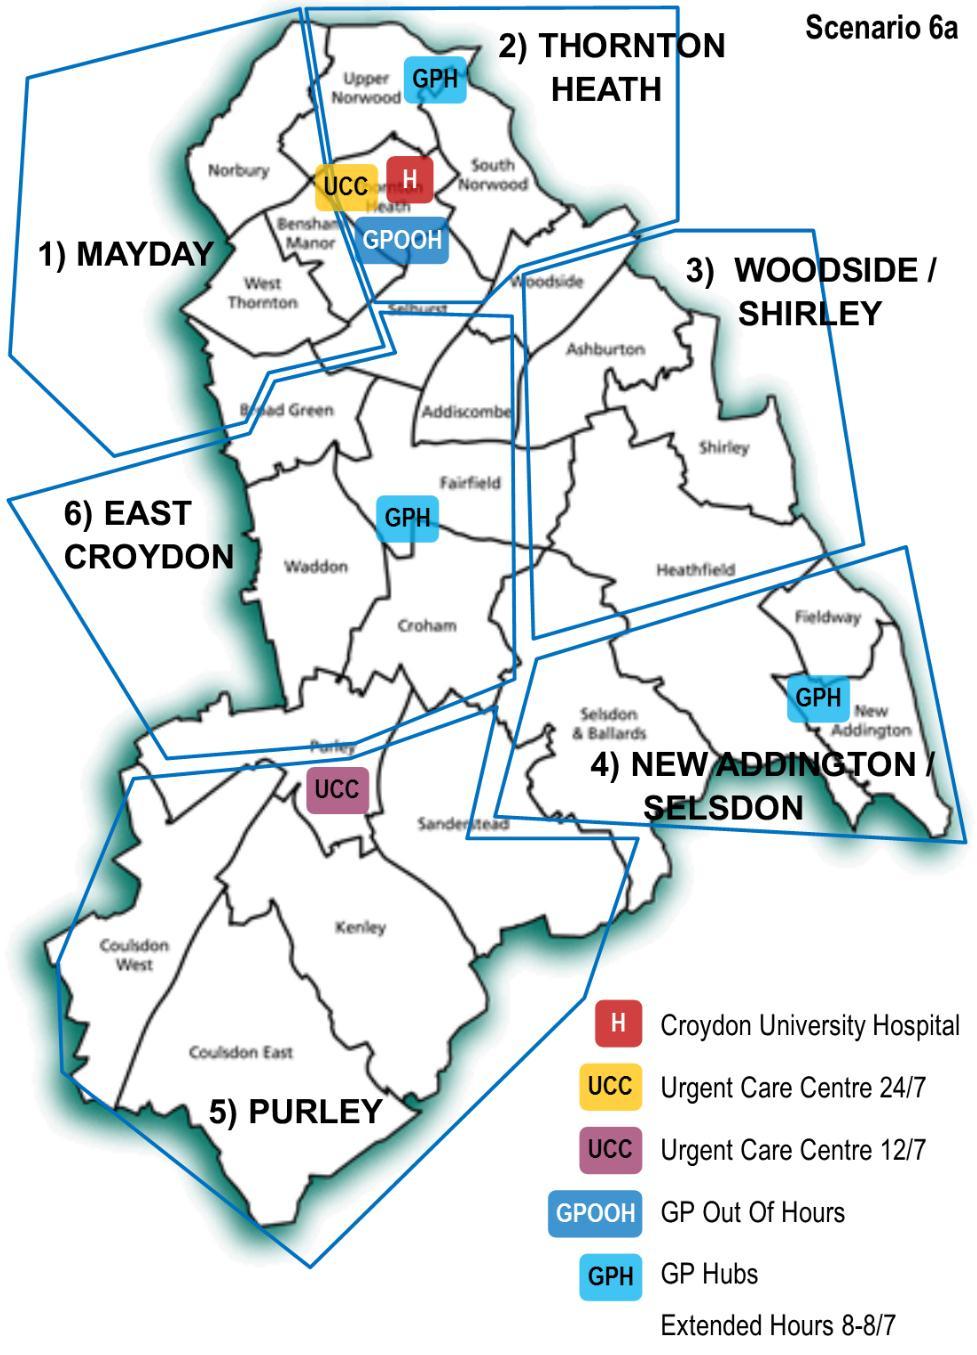 Scenario 6a x UCC (Urgent Care Centre) for 4 hours 7 days a week Based at the front of A&E x GP OOH service co-located with UCC x UCC for hours-a-day for 7 days-a-week located at Purley 3 x GP